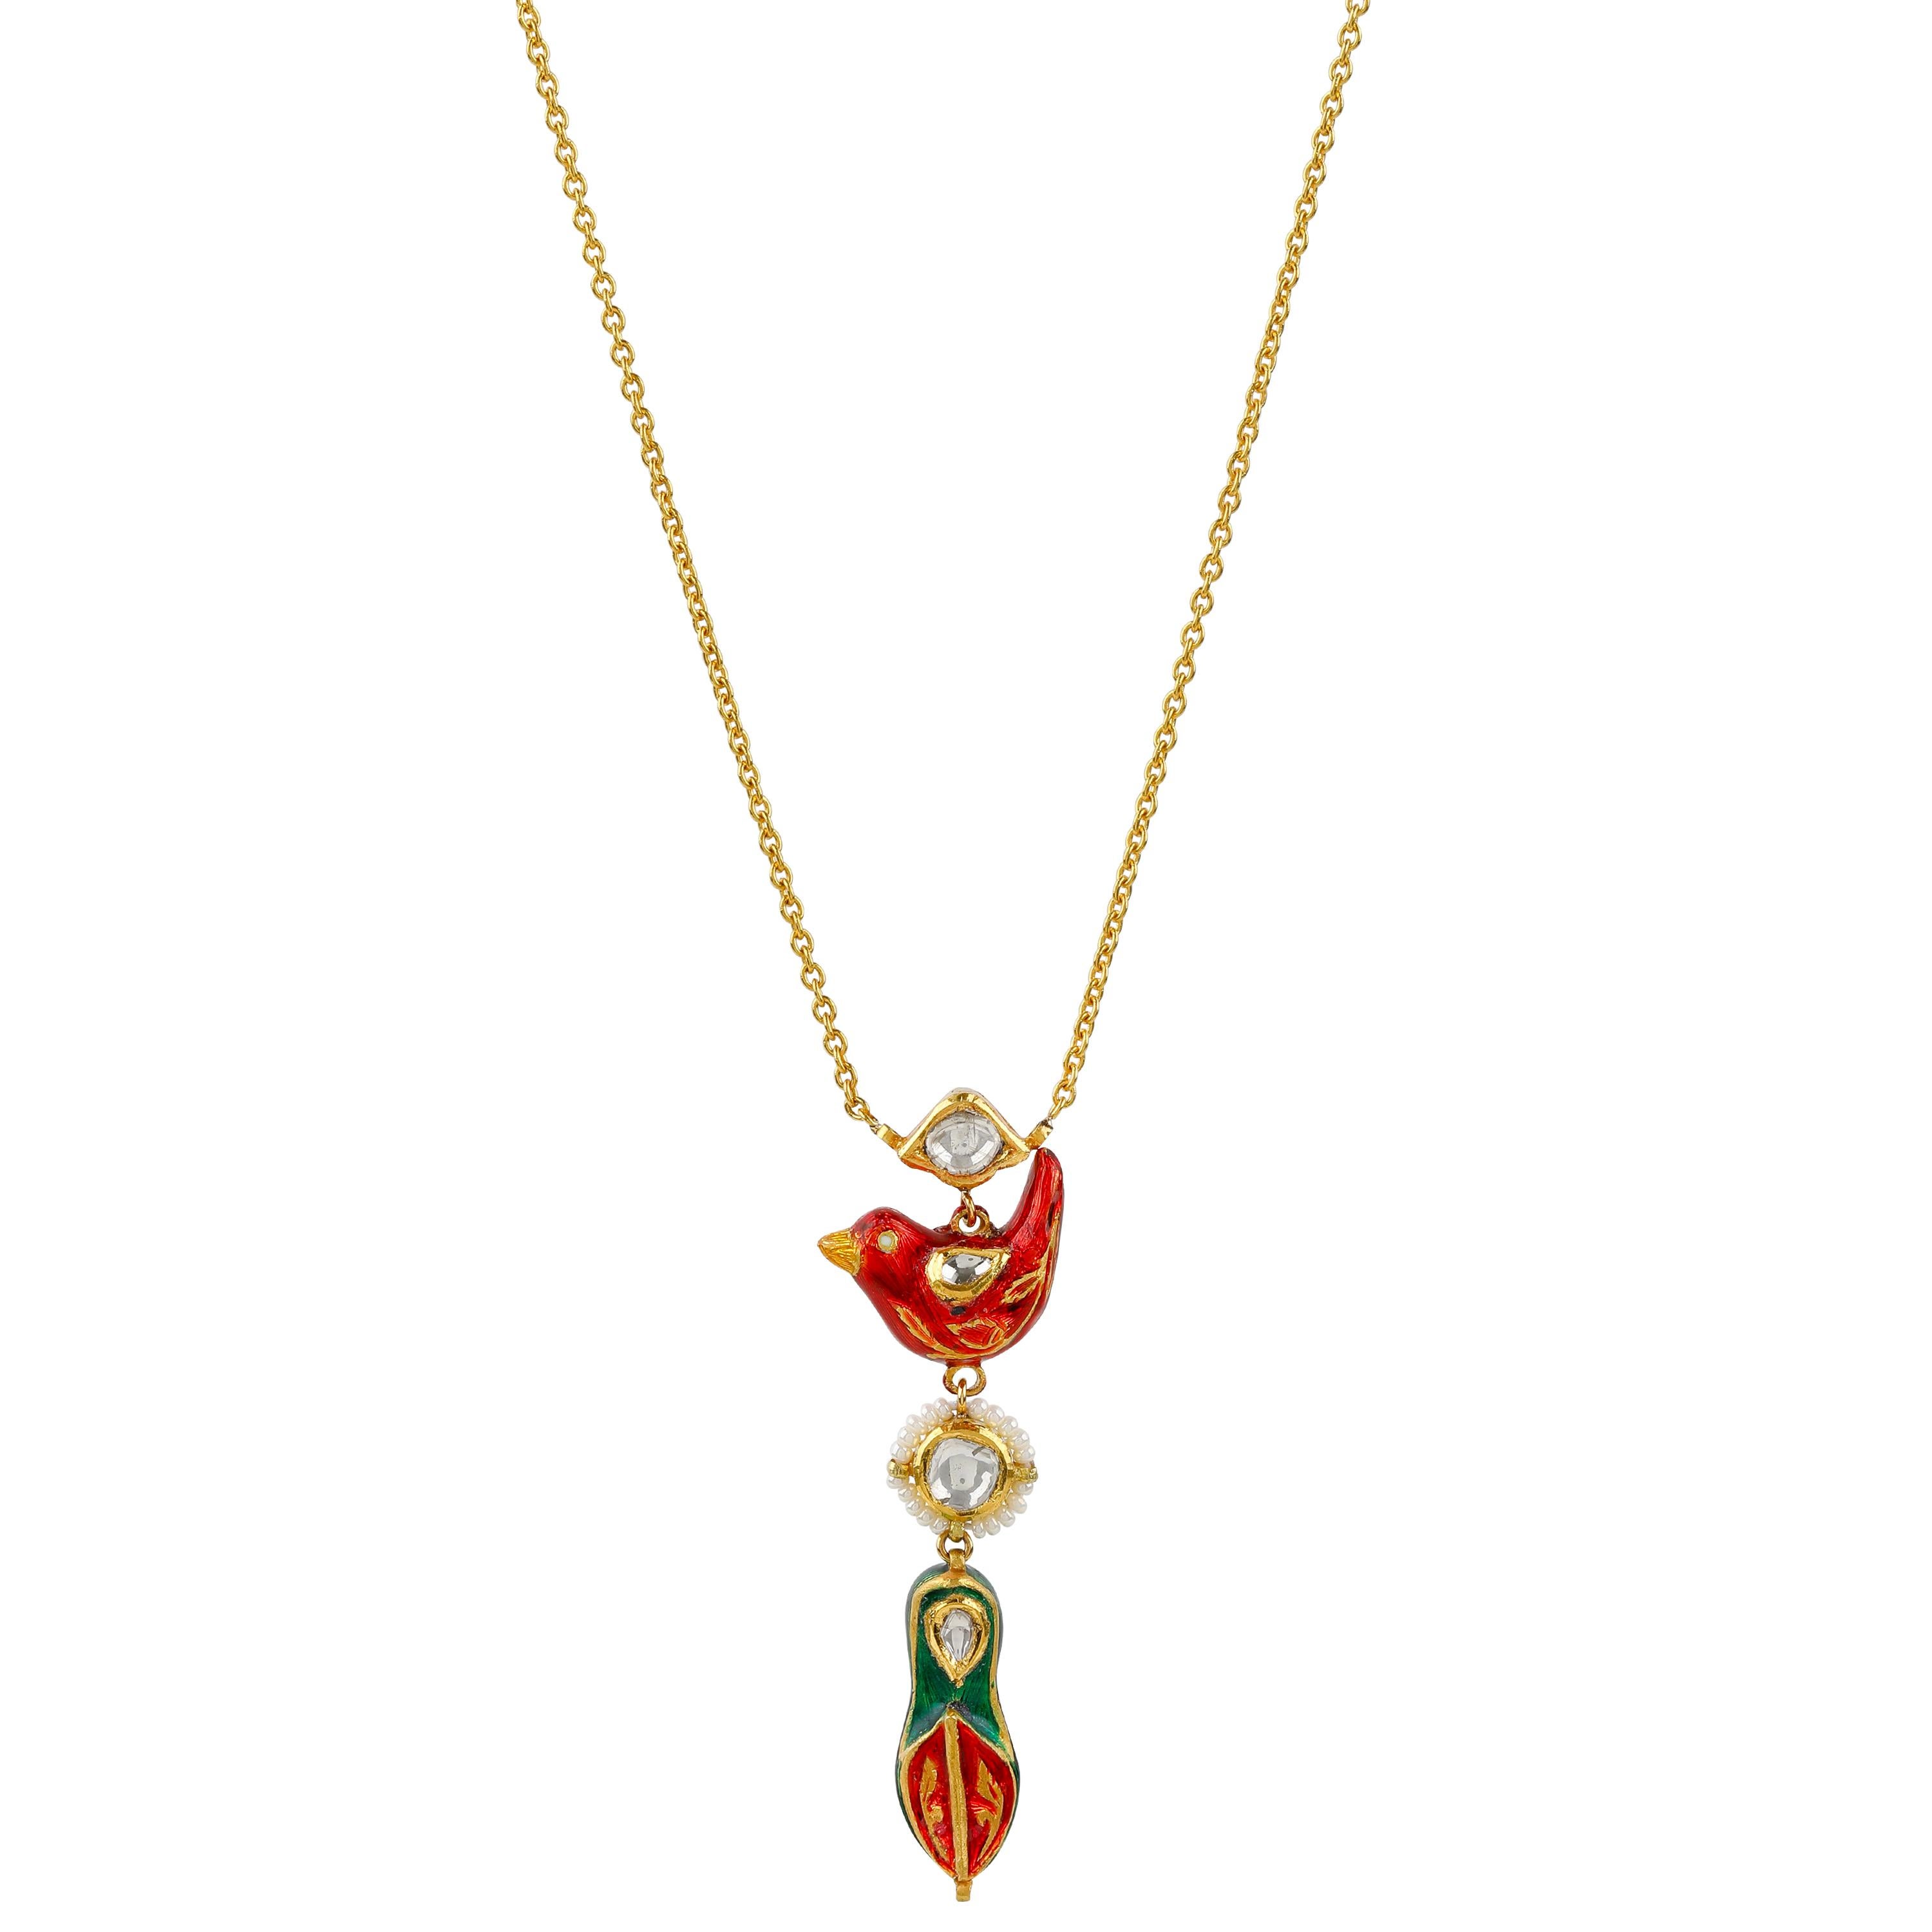 22 Karat Yellow Gold Bird and Jutti Necklace with Uncut Diamond and Enamel For Sale 1